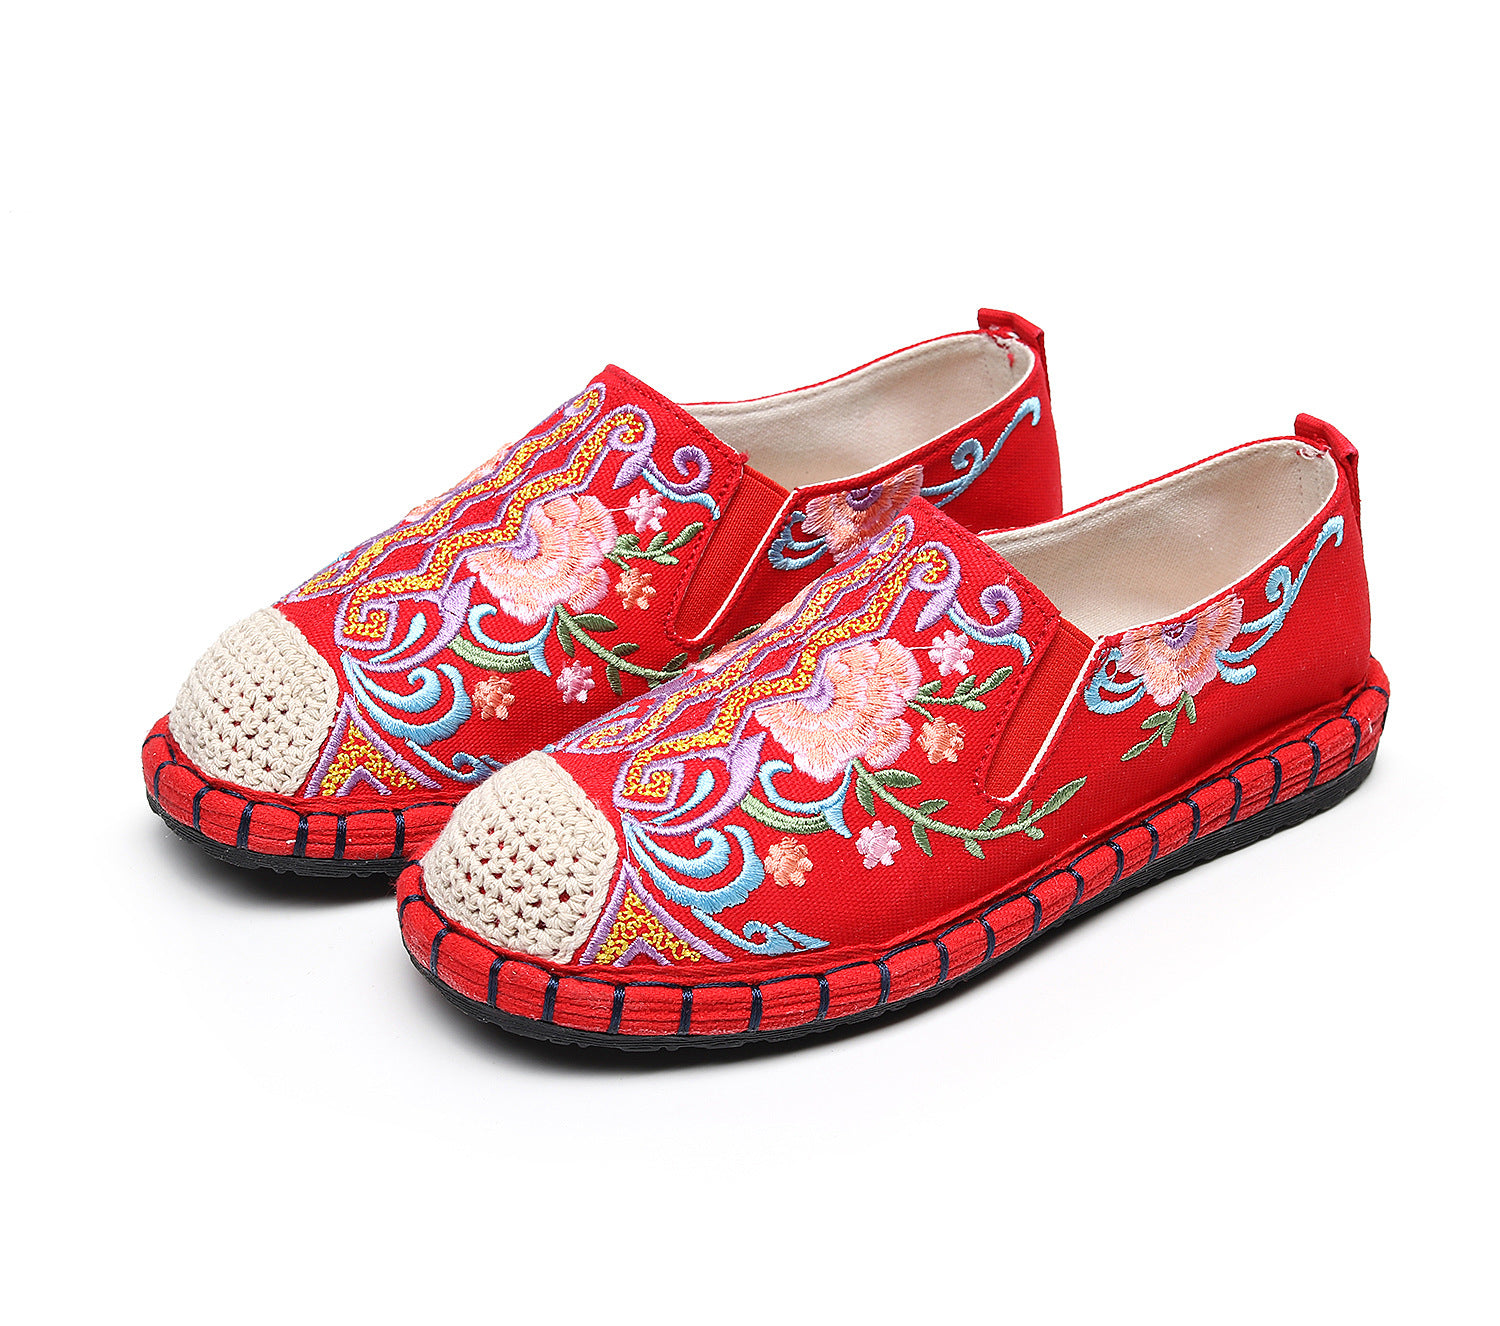 Women's Soft Bottom Multi-layer Ethnic Style Embroidery Canvas Shoes